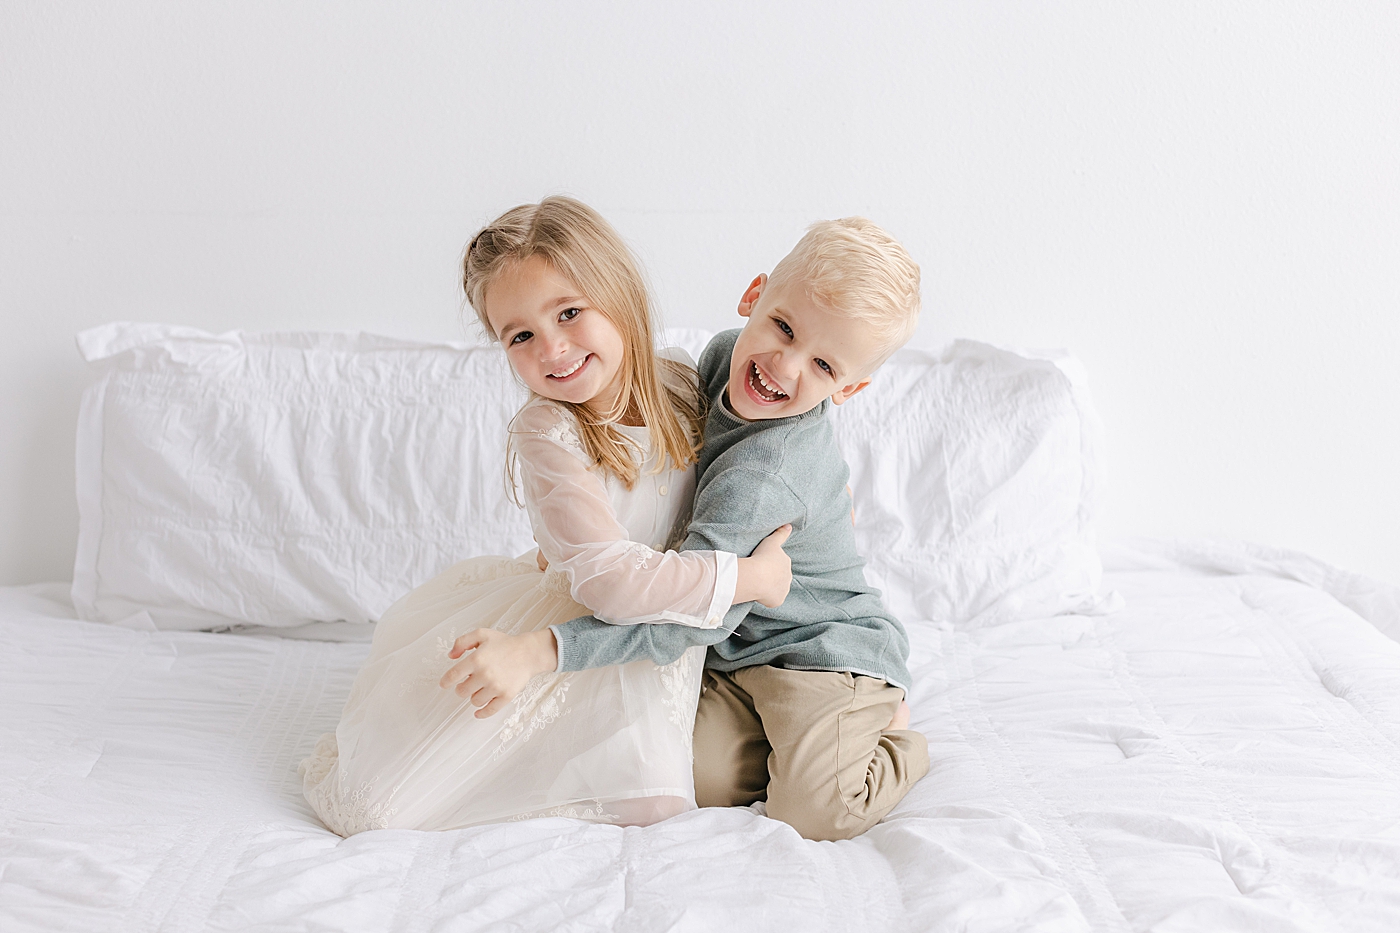 Toddler brother and sister giggling and laughing | Photo by Sana Ahmed Photography